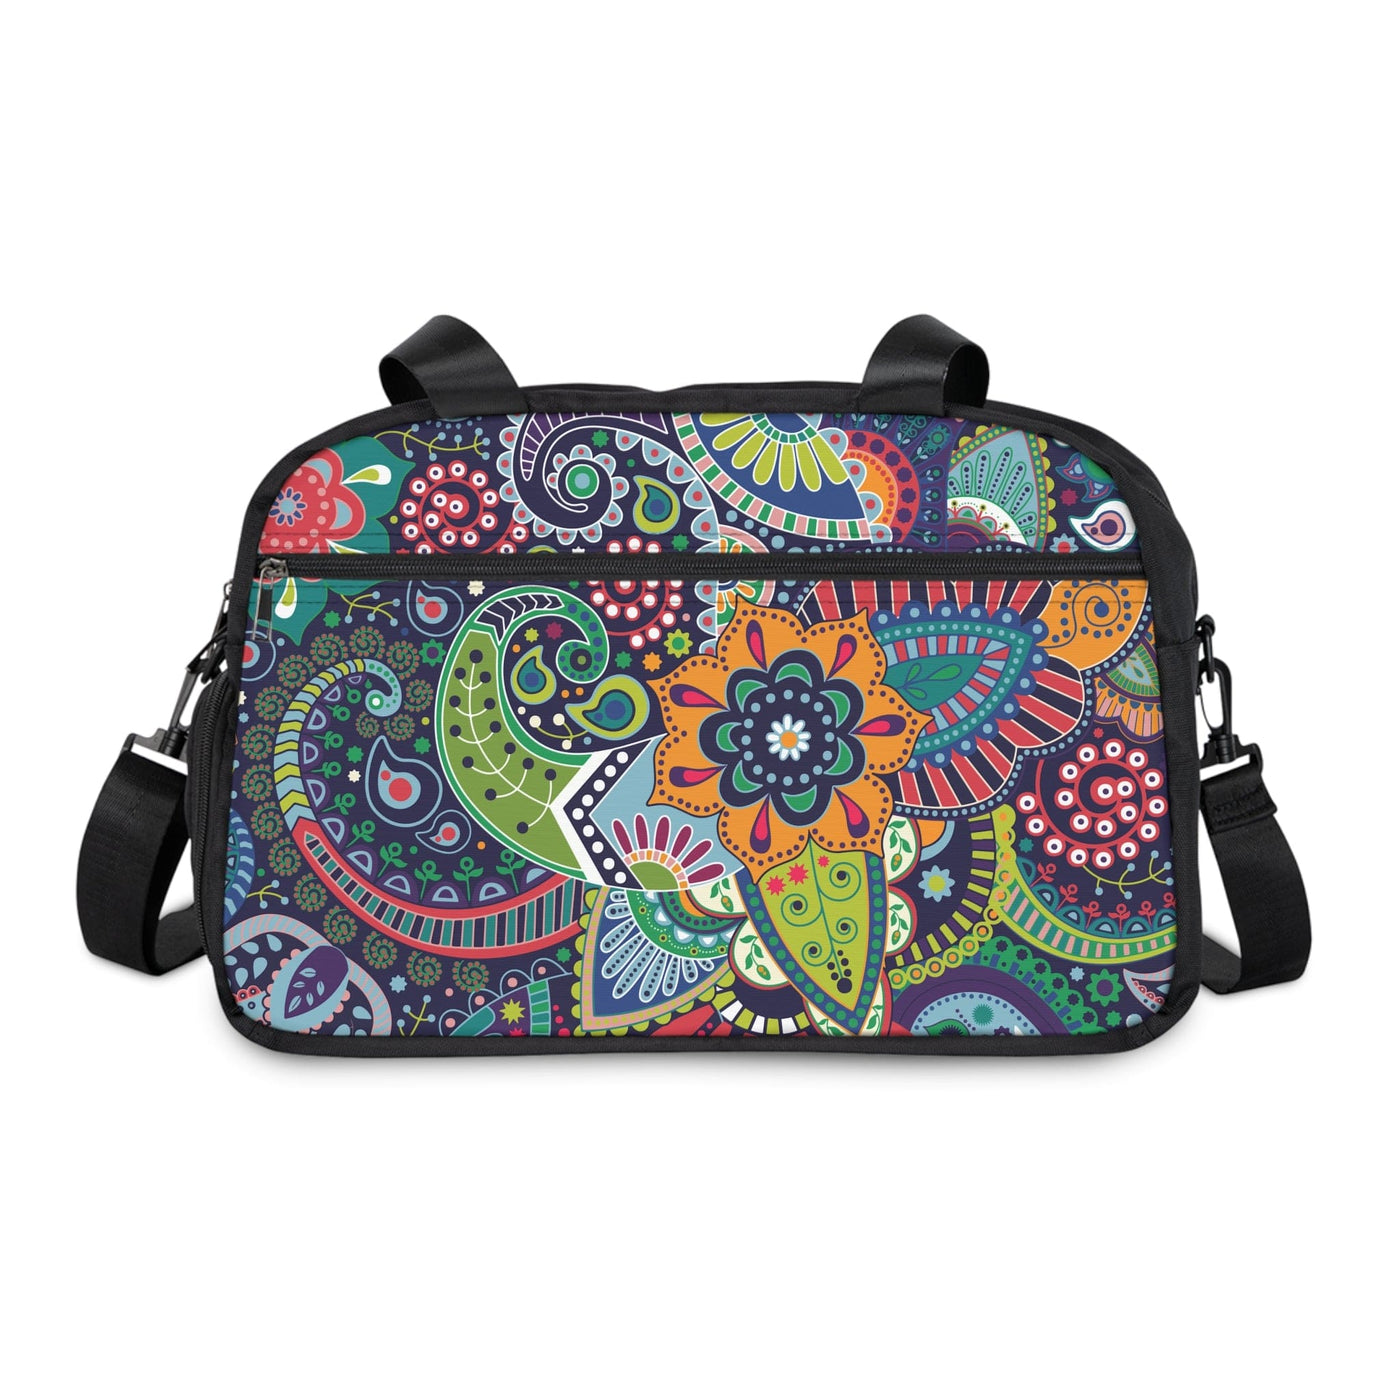 Travel Fitness Bag Floral Paisley 22523 - Bags